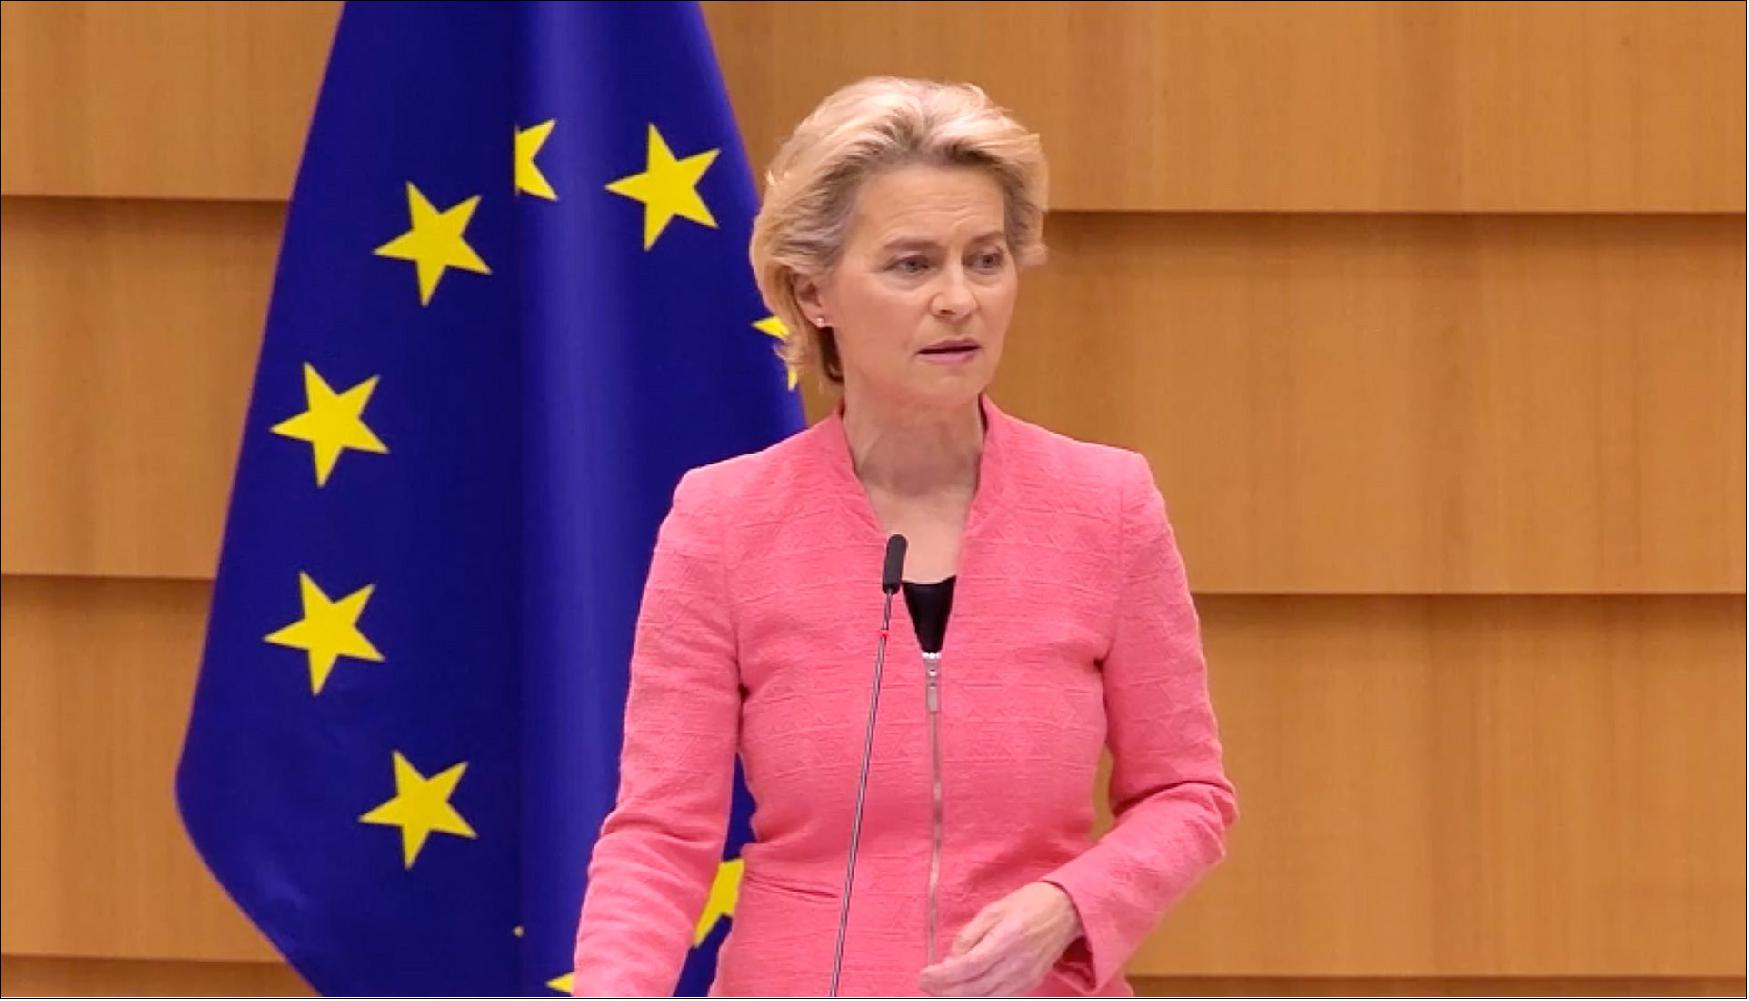 Figure 1: Ursula von der Leyen is the President of the European Commission and in her 2020 State of the Union address, she set a new target of a 55% cut in greenhouse gas emissions by 2030 compared to 1990 levels. The previous target had been a 40% reduction (image credit: European Union)